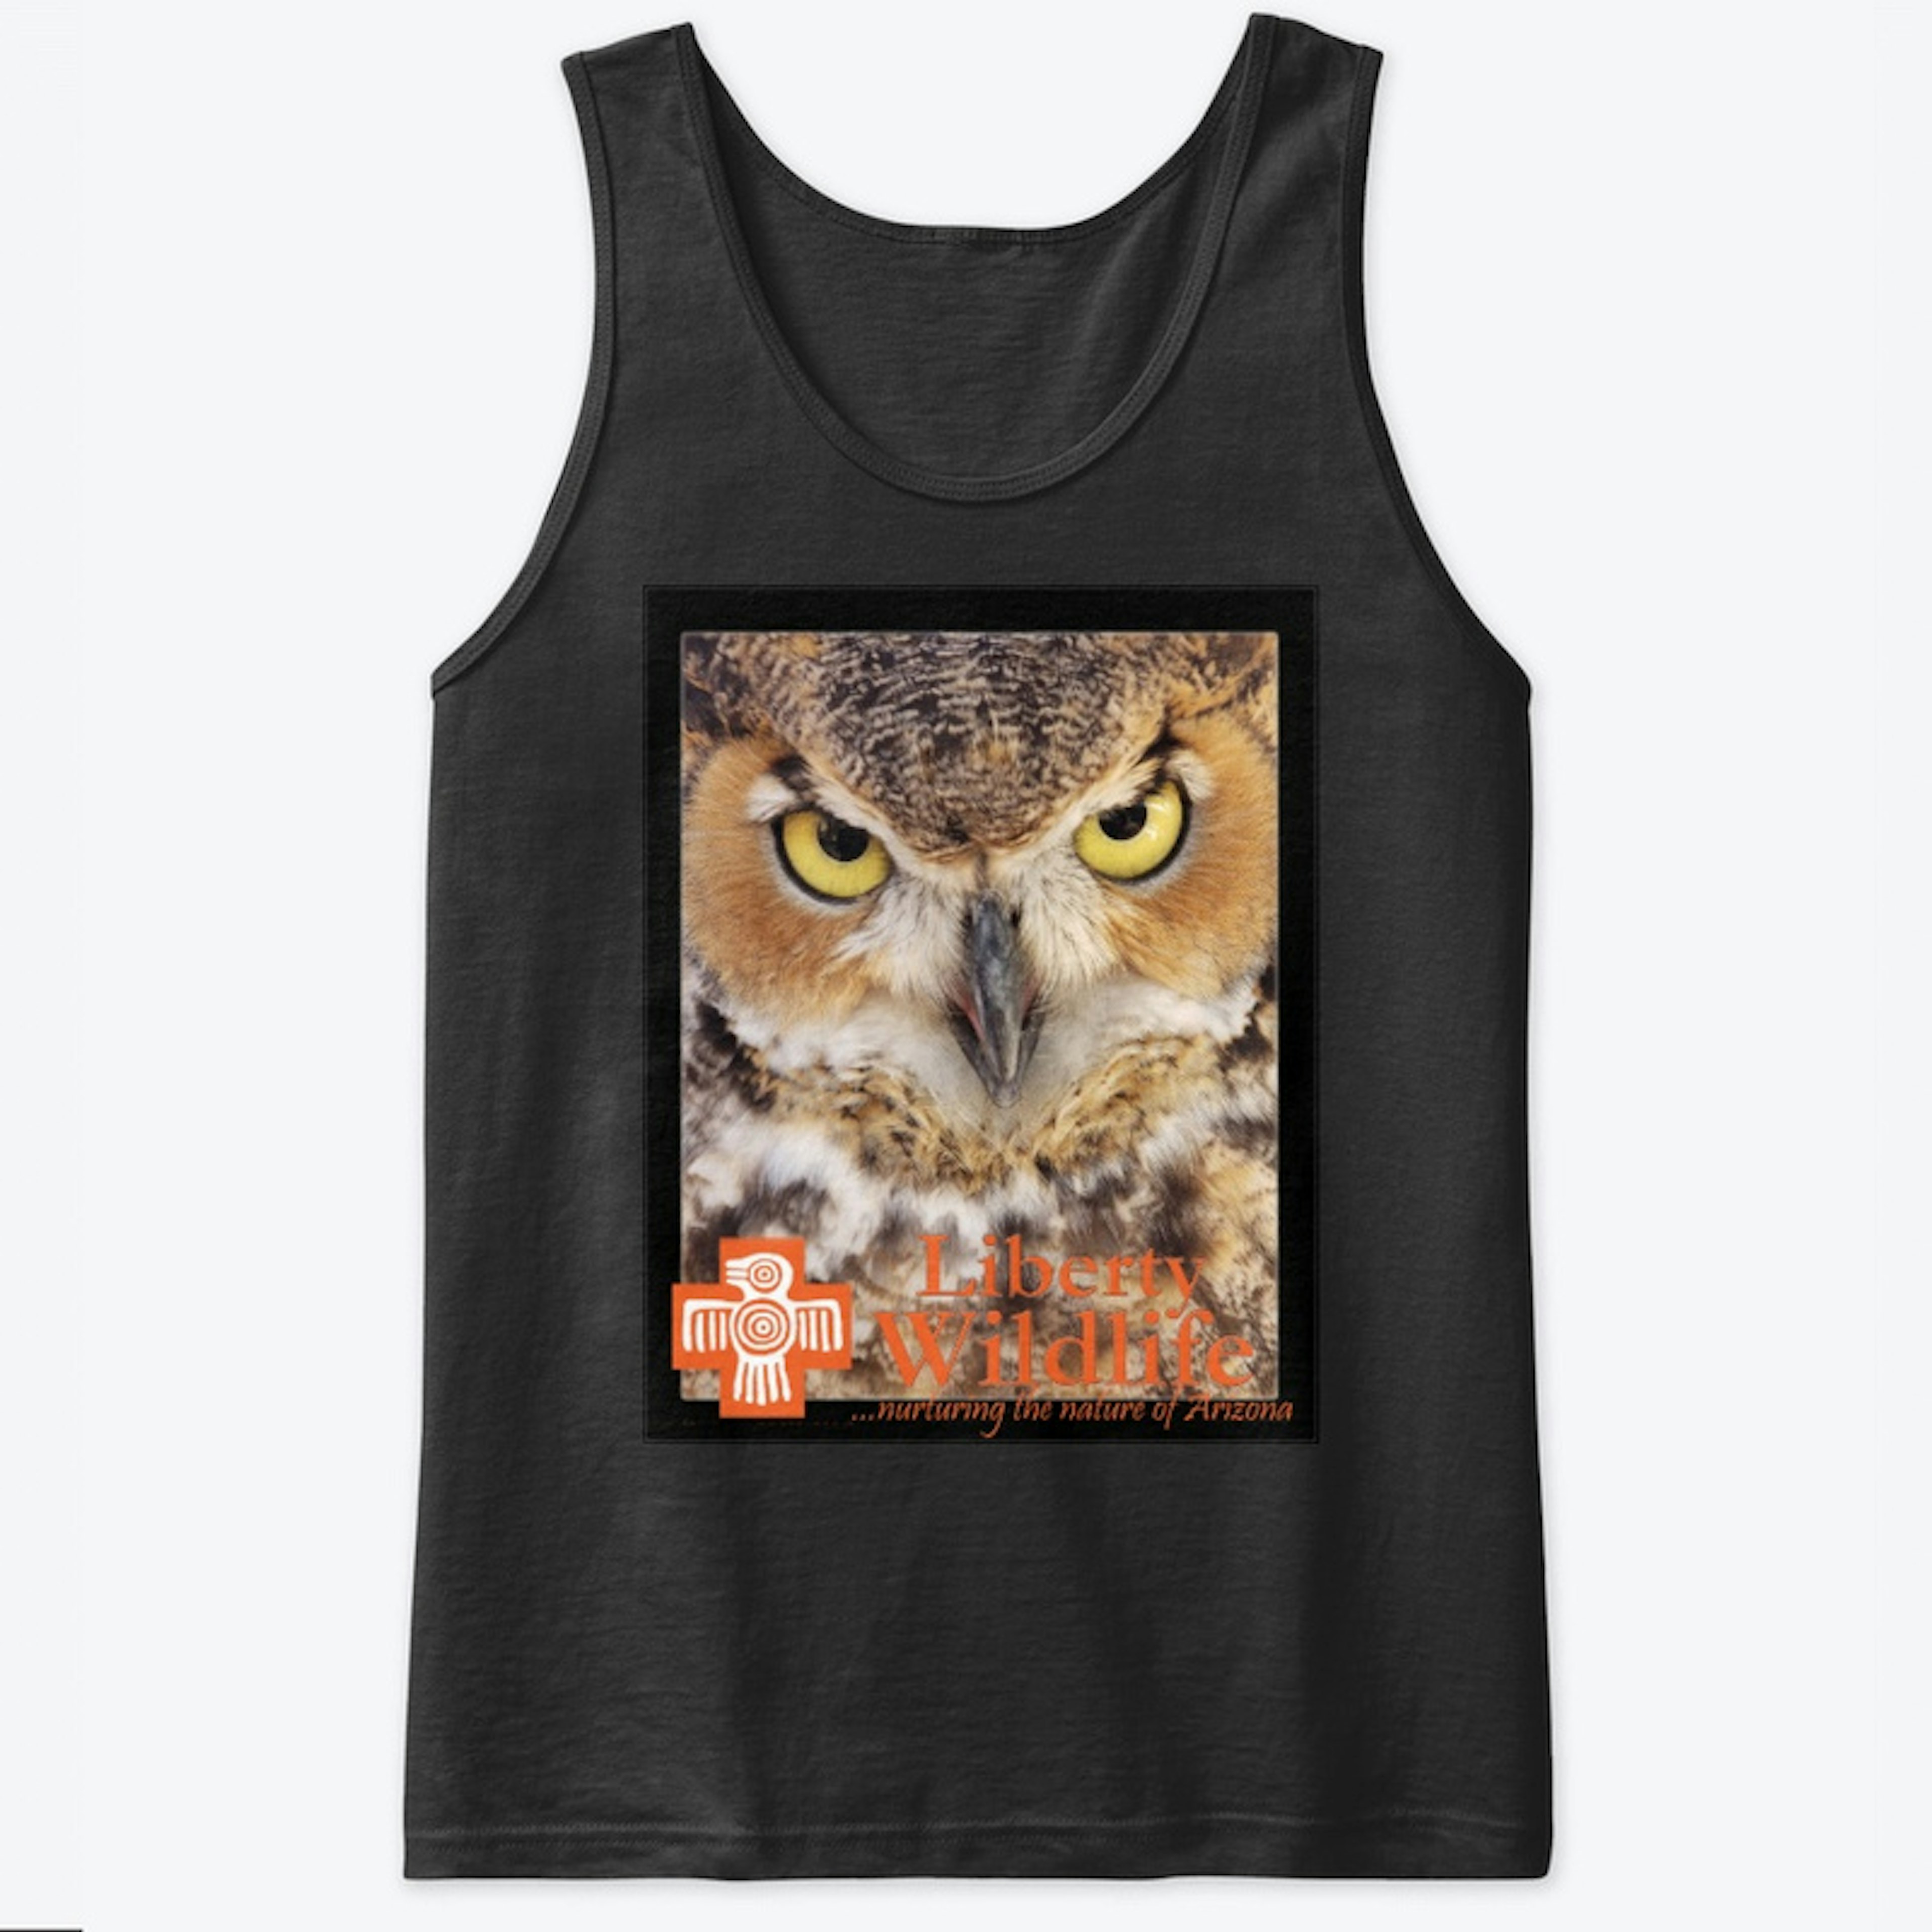 Great Horned Owl Clothing